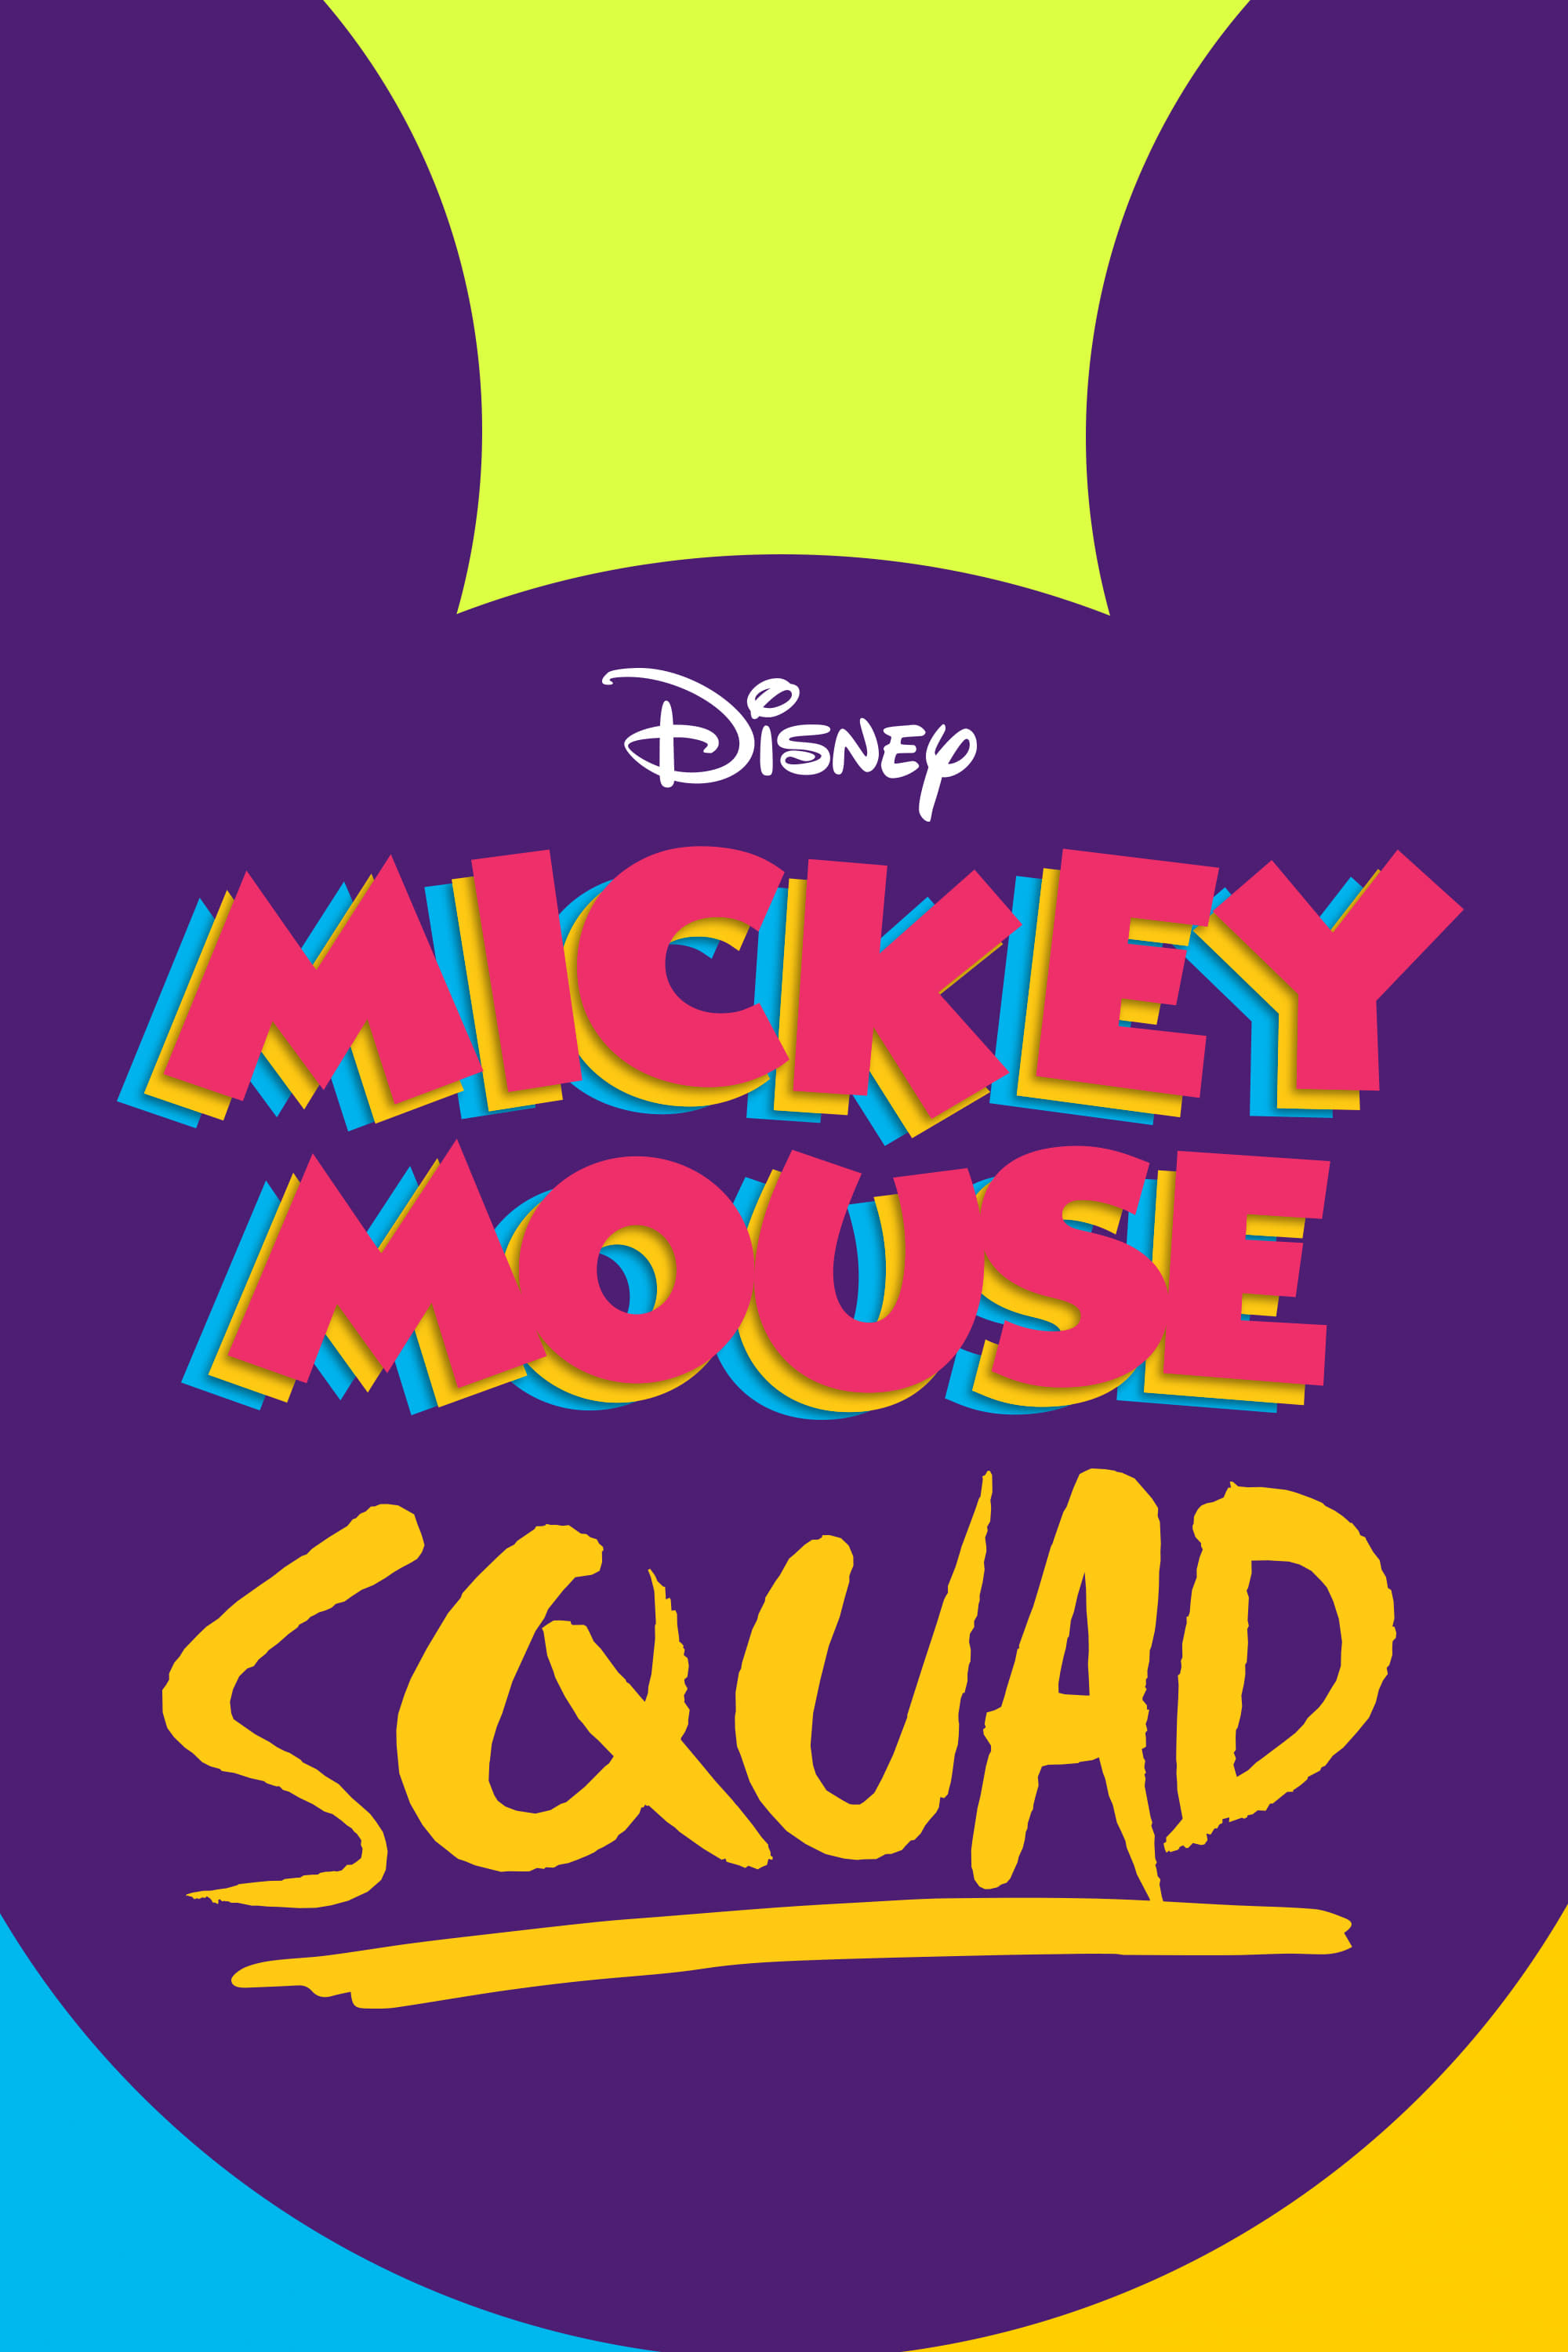 Mickey Mouse Squad